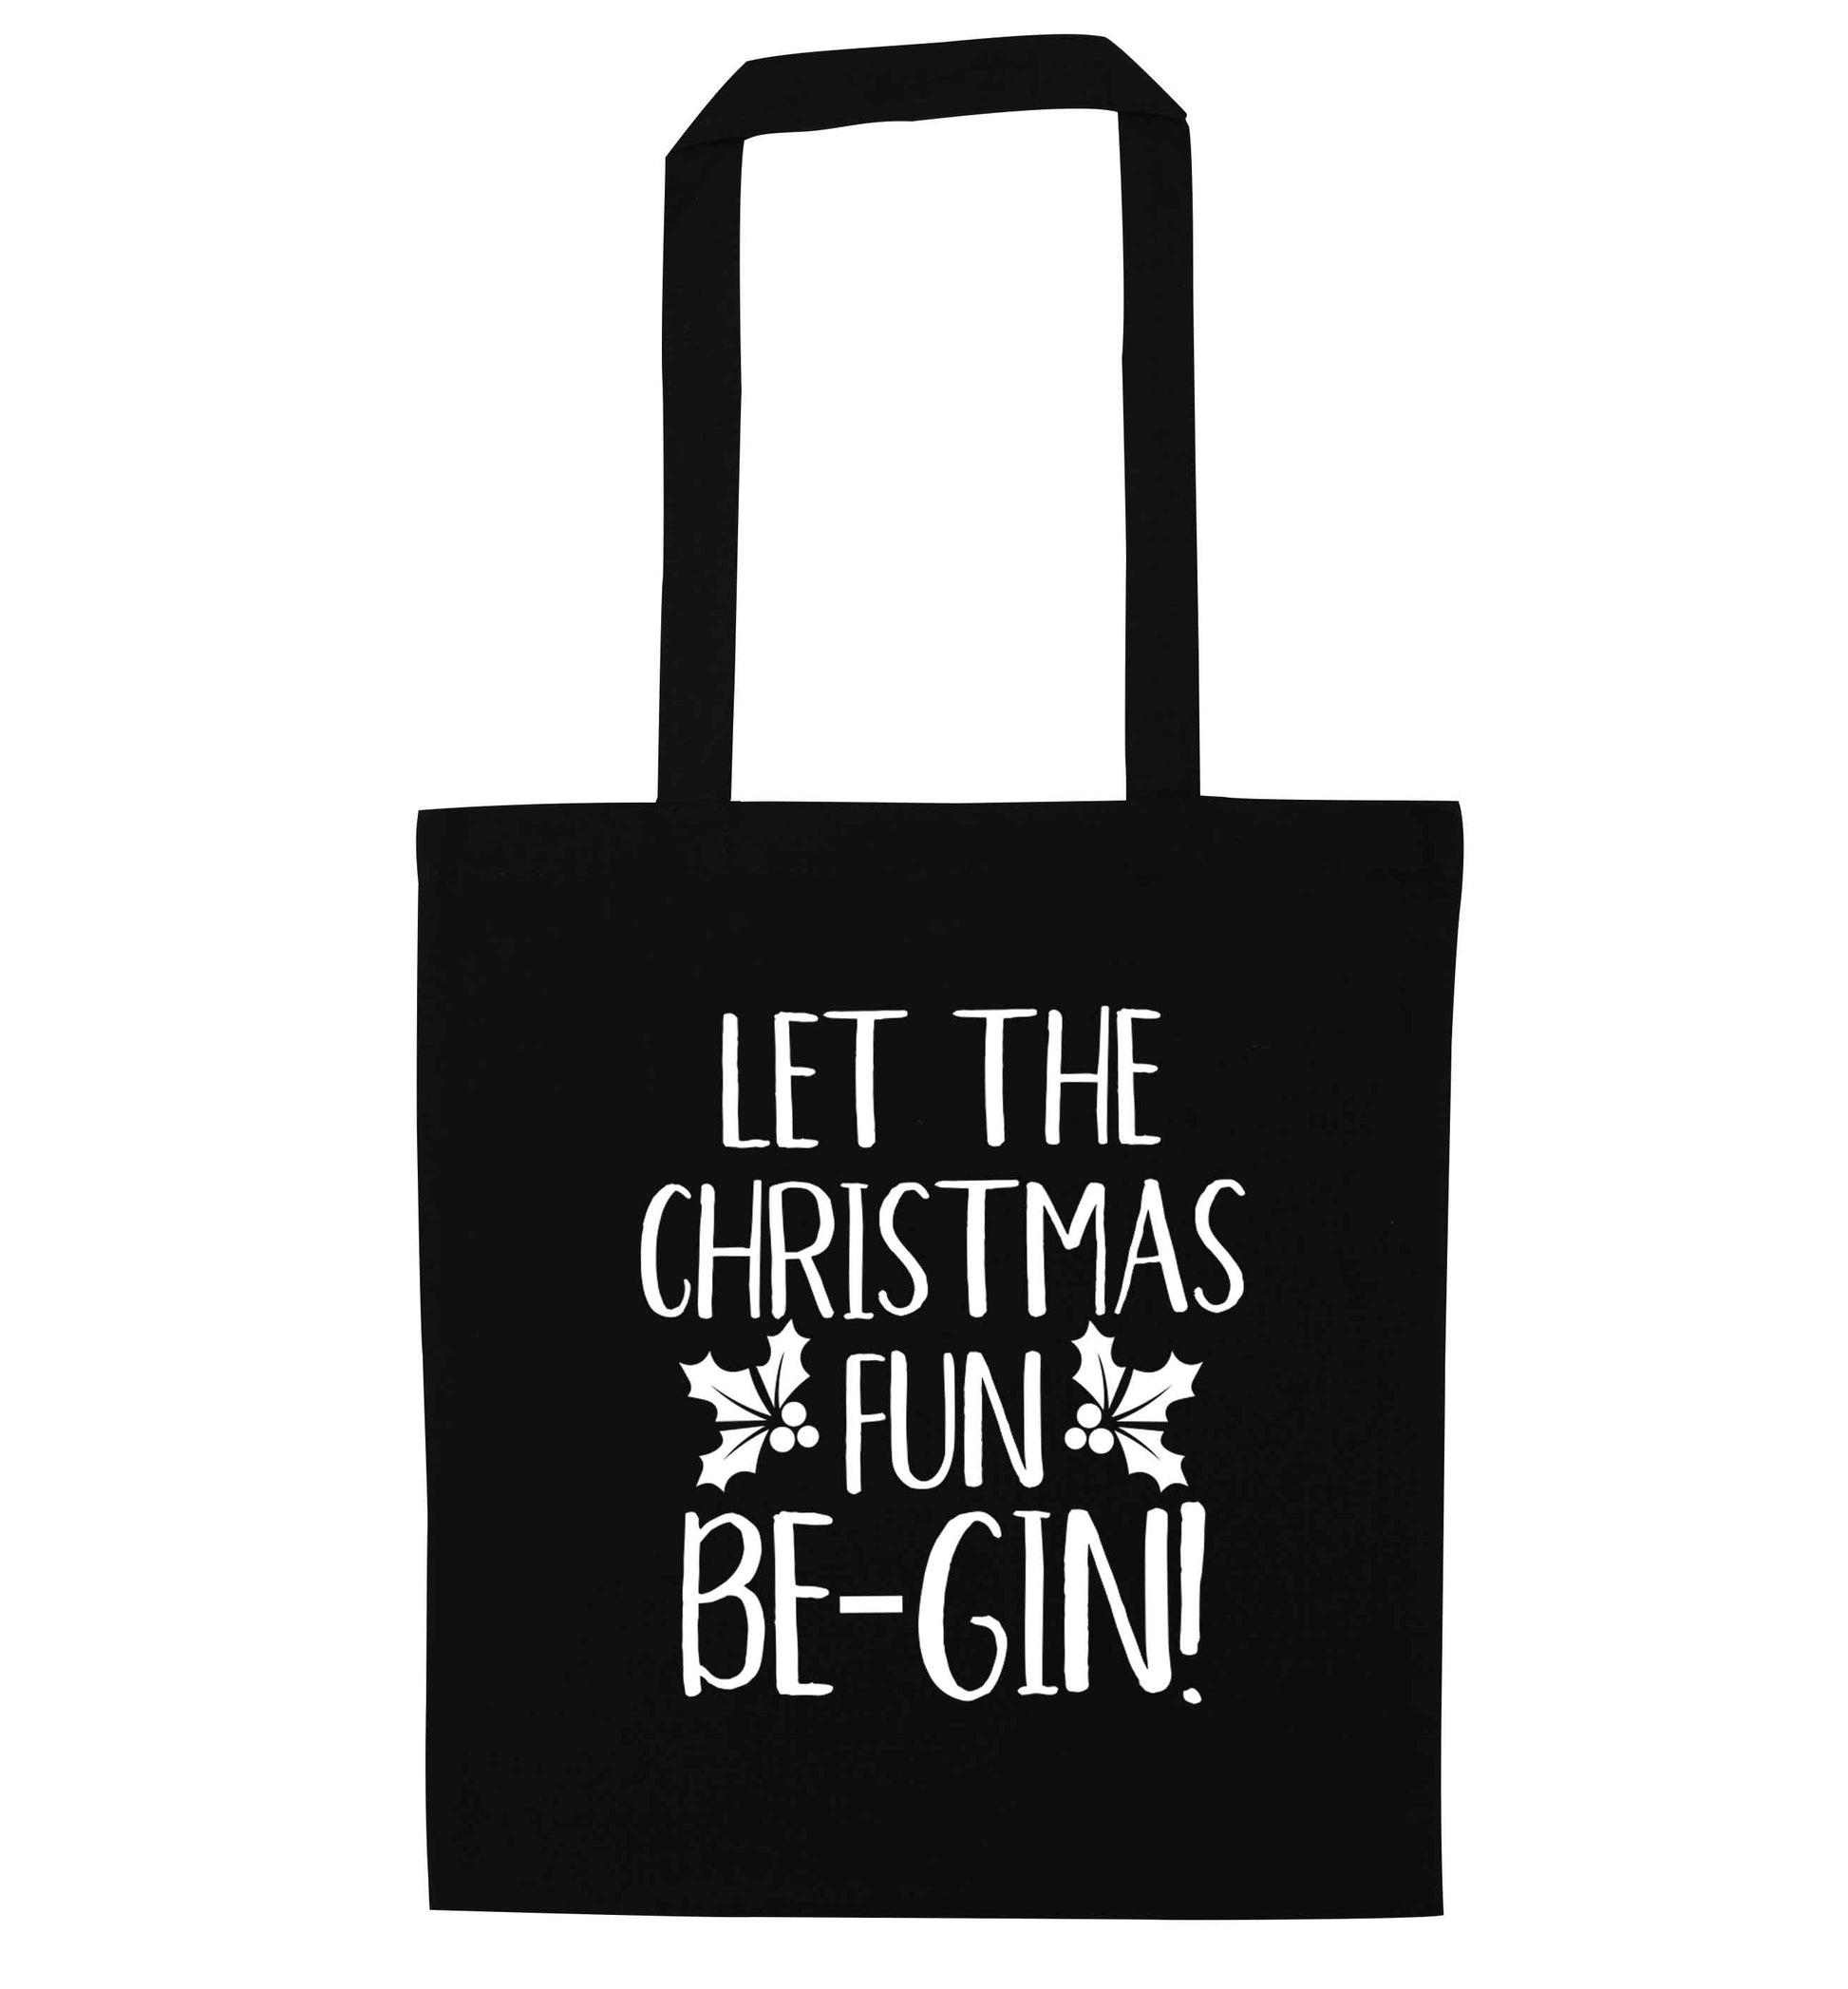 Let the christmas fun be-gin black tote bag